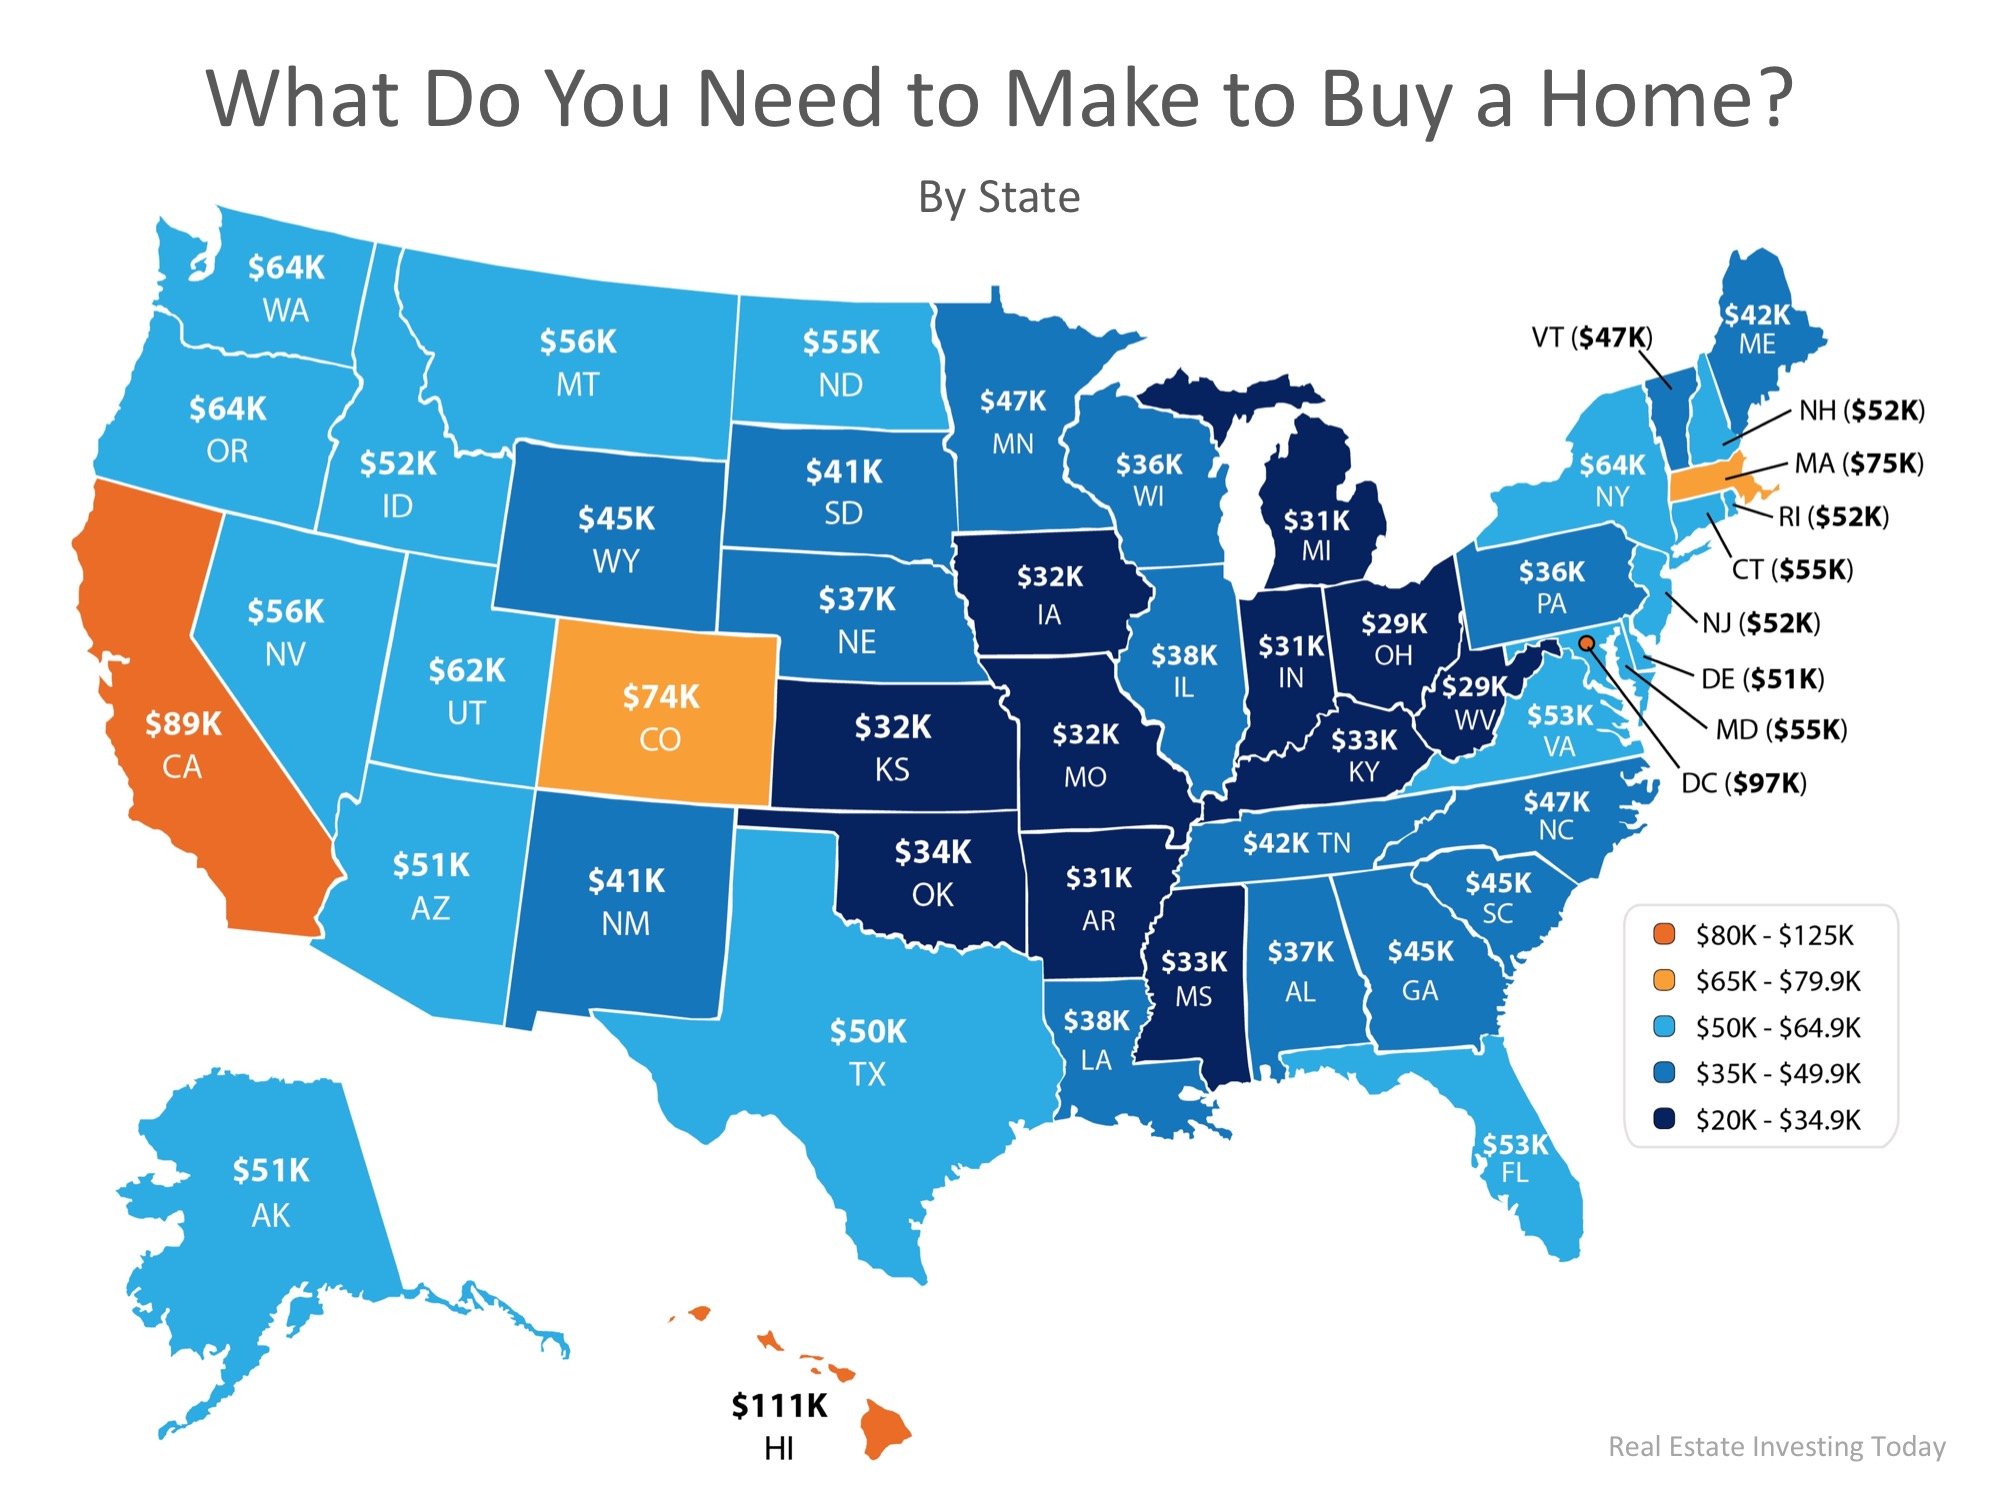 How Much Do You Need to Make to Buy a Home in Your State? | Simplifying The Market